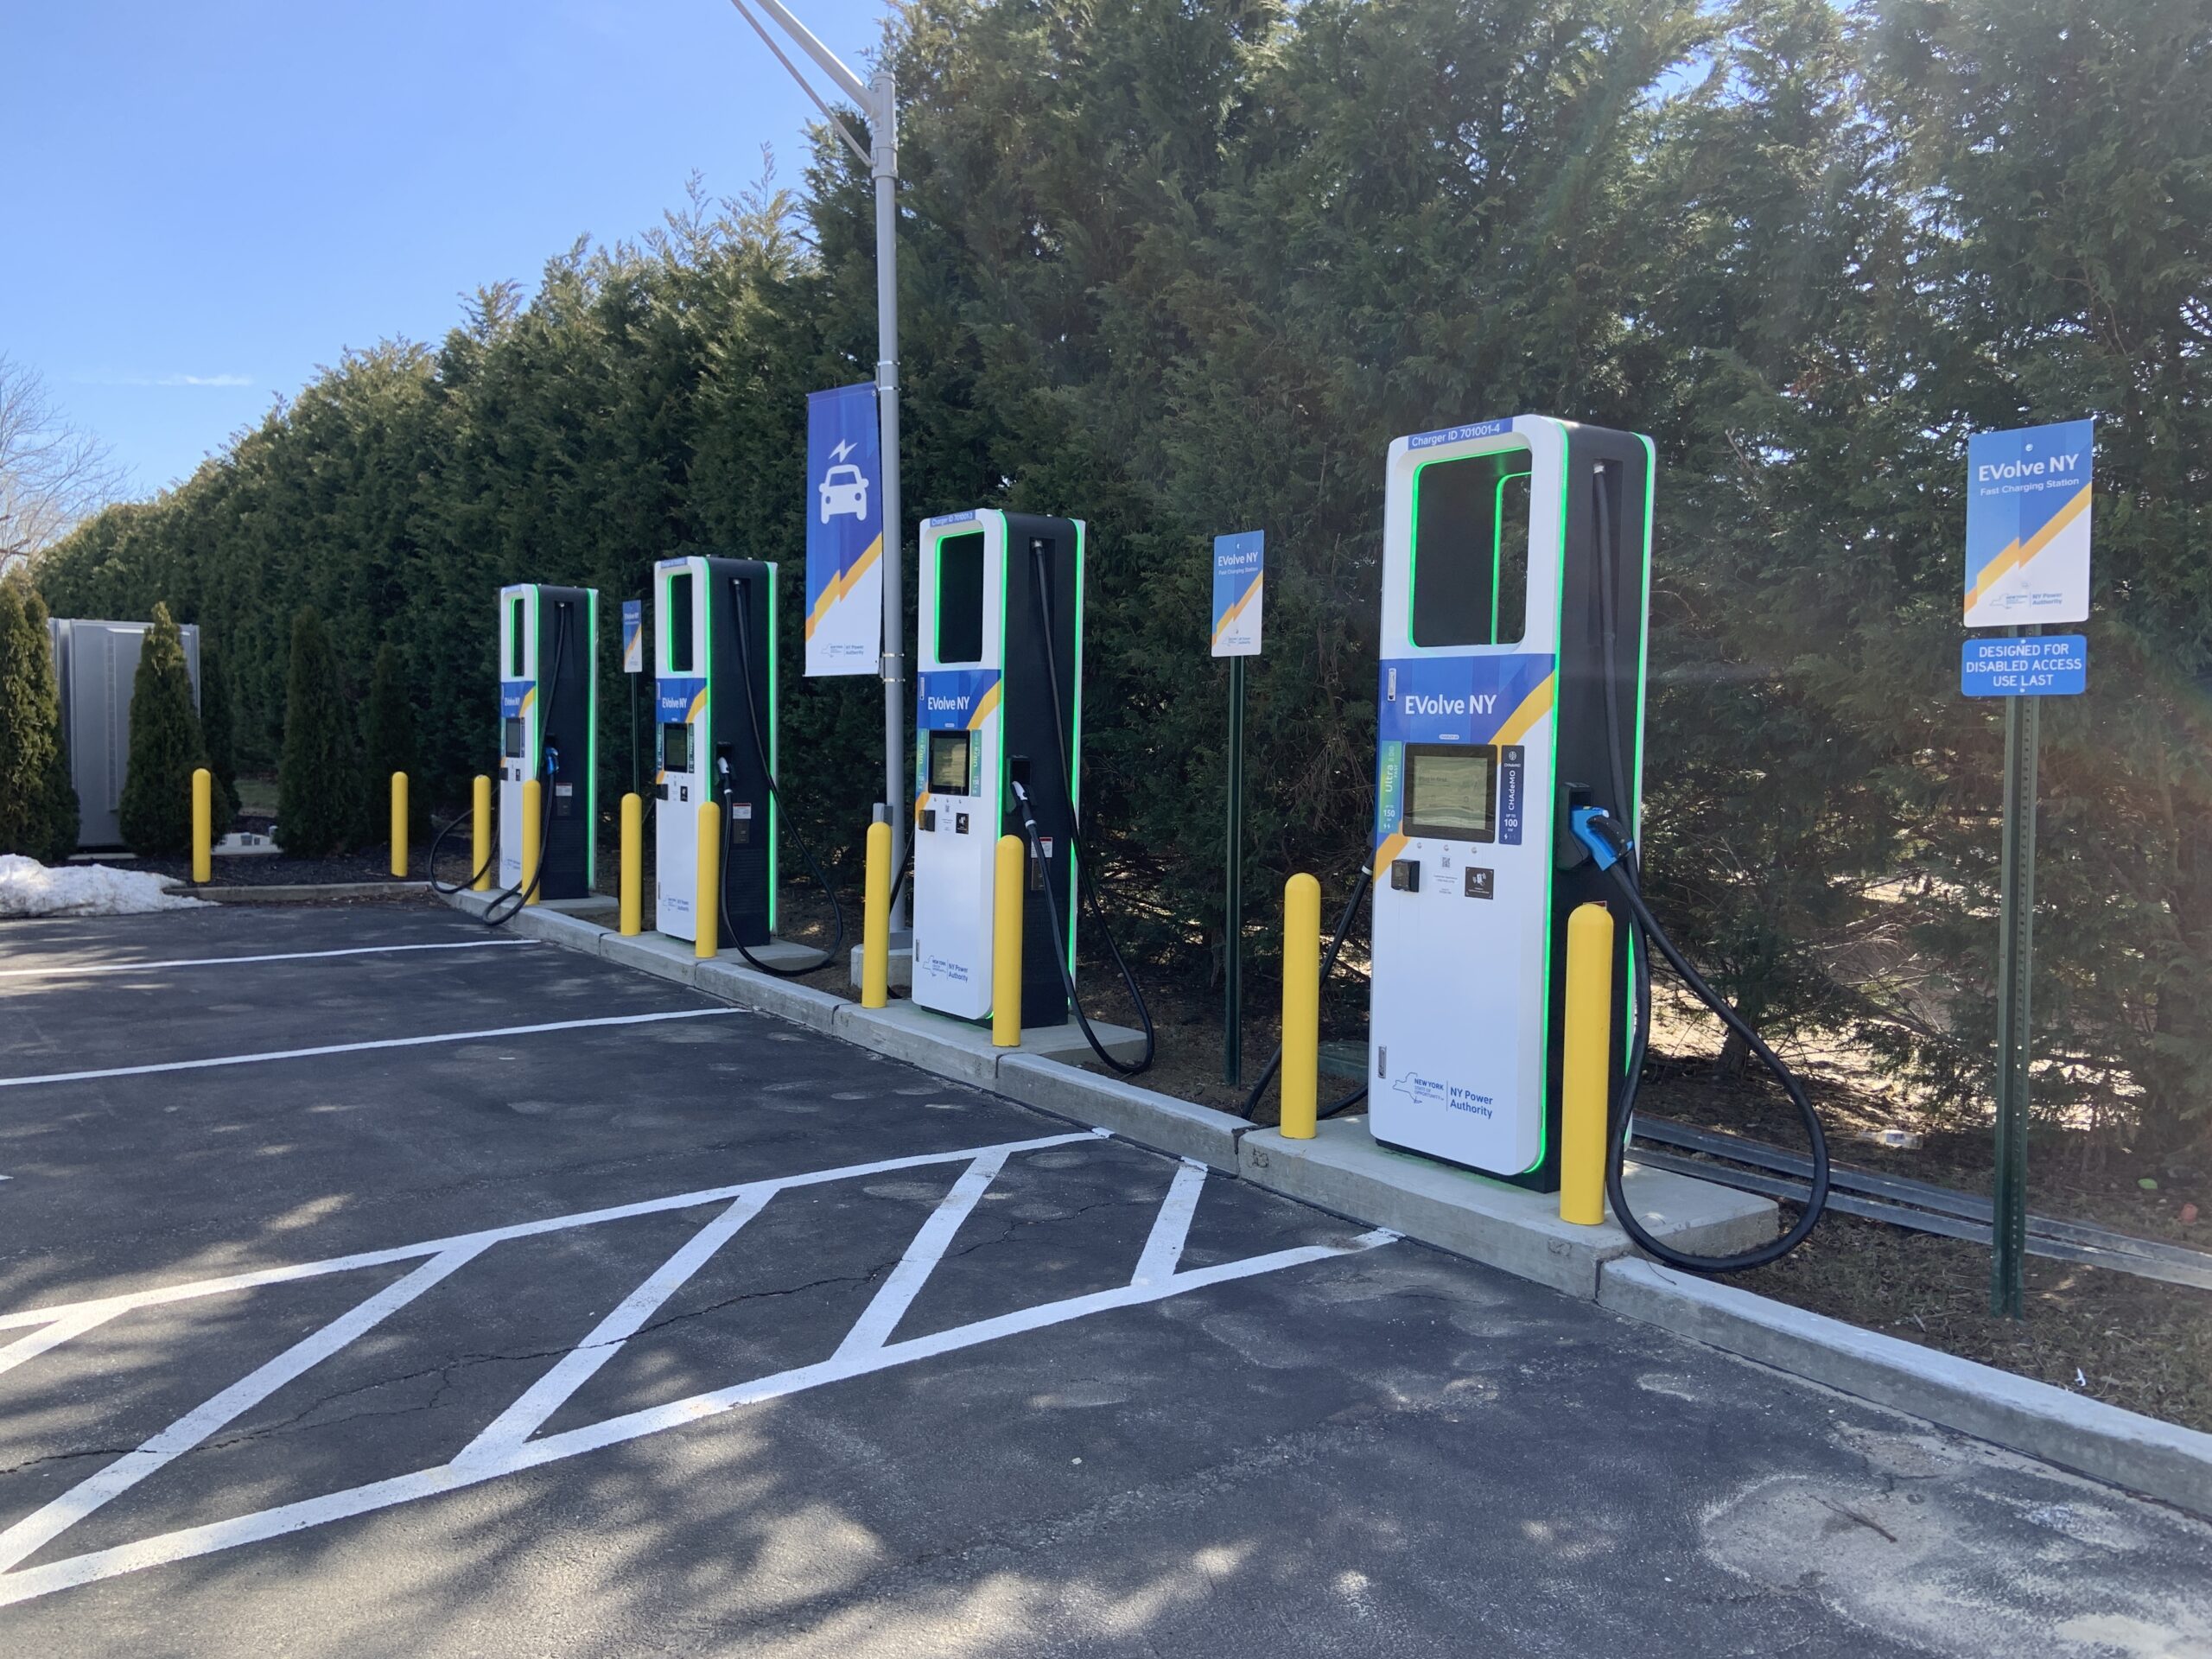 Four electrical vehicle charging stations will soon be operational in the School Street parking lot behind the Candy Kitchen restaurant in Bridgehampton. STEPHEN J. KOTZ